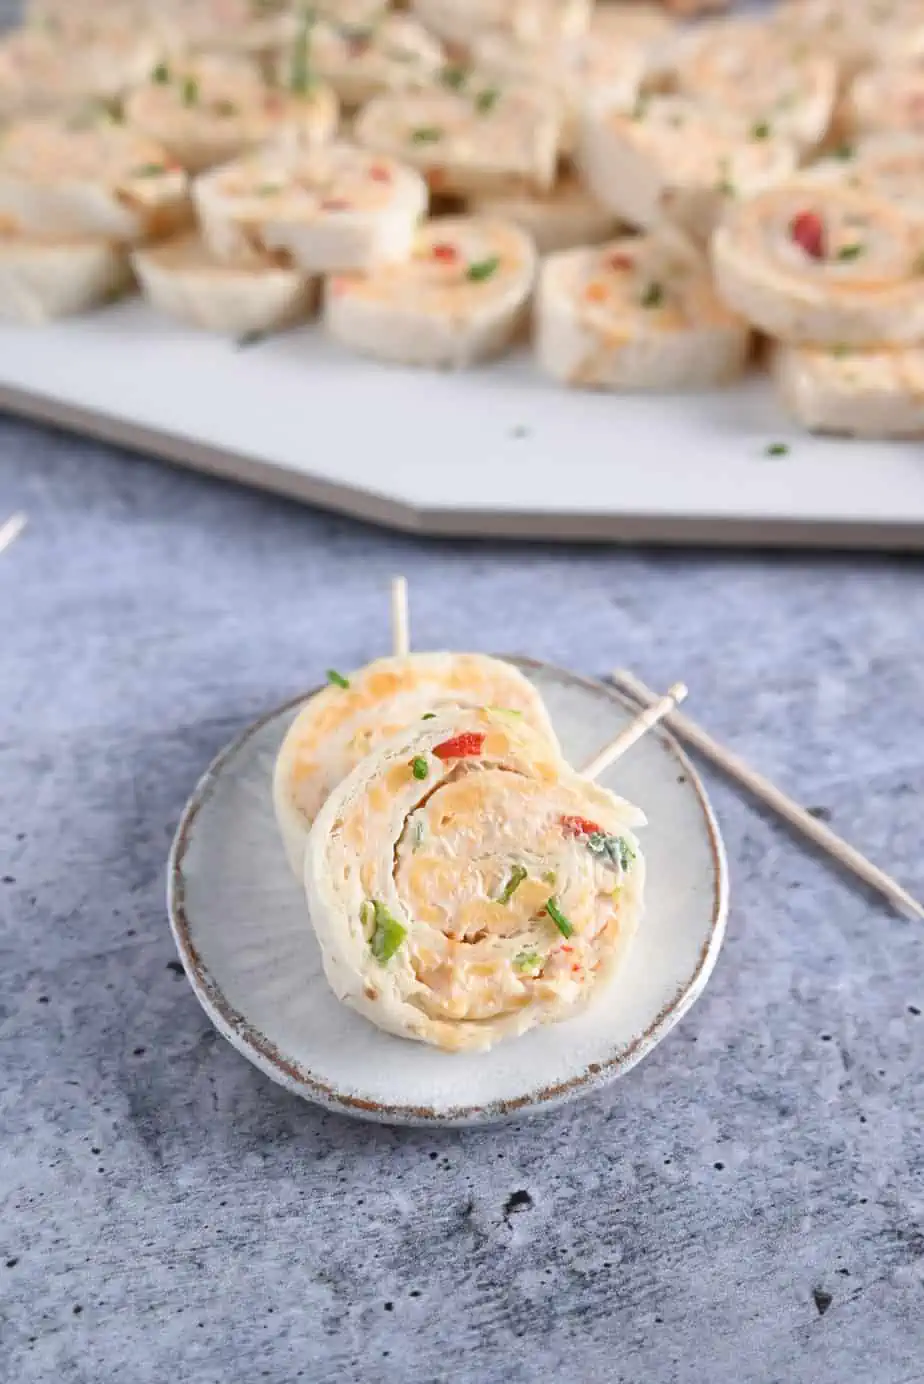 Two pimento cheese pinwheels on a small ceramic plate. A platter of the pinwheels is visible in the background.